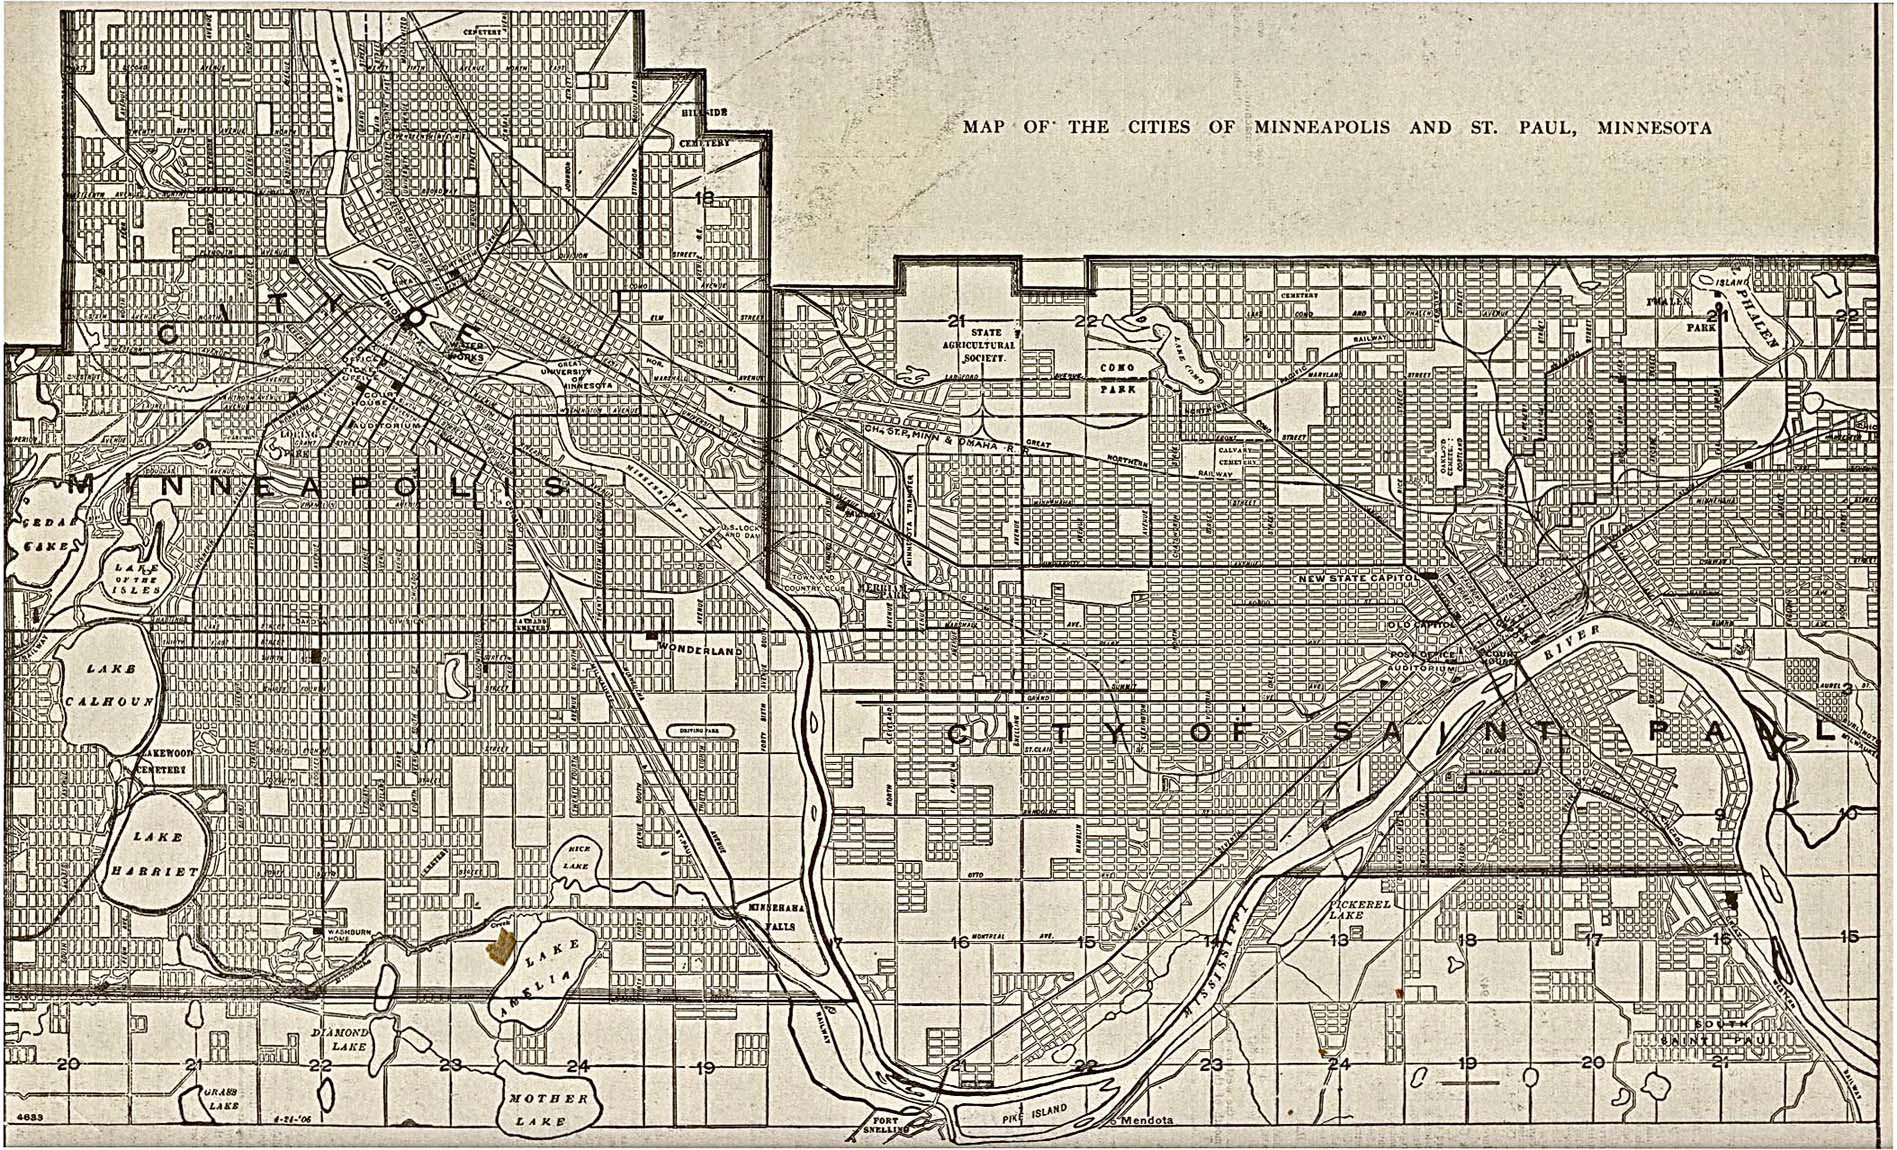 Twin Cities 1906 | Old Maps | Pinterest